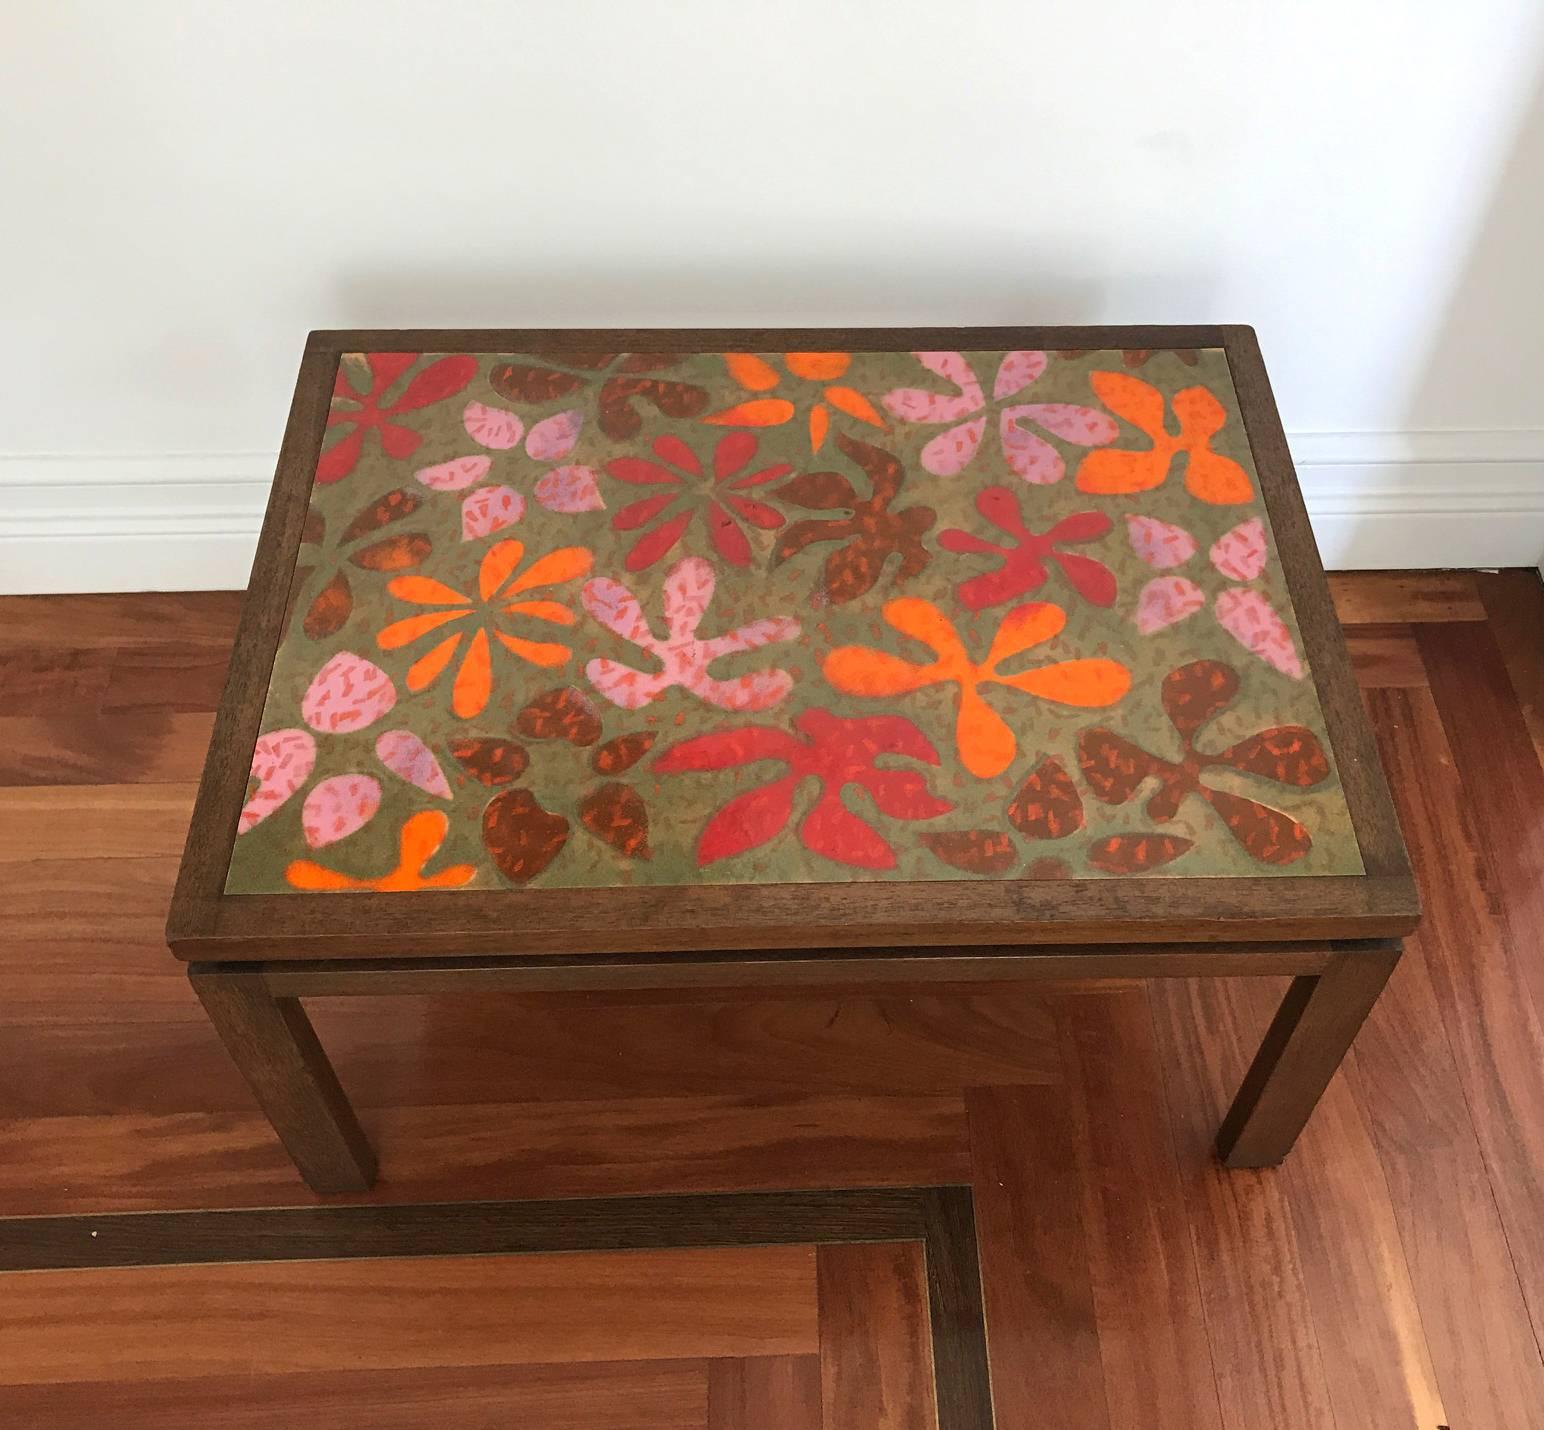 A beautiful side table or small coffee table by Harvey Probber, circa 1950s. Elegant and Minimalist form in mahogany with a rare top surface of colored enamel brass by Arpad and Ilona Rosti. The Rostis were artists/crafters who started out as